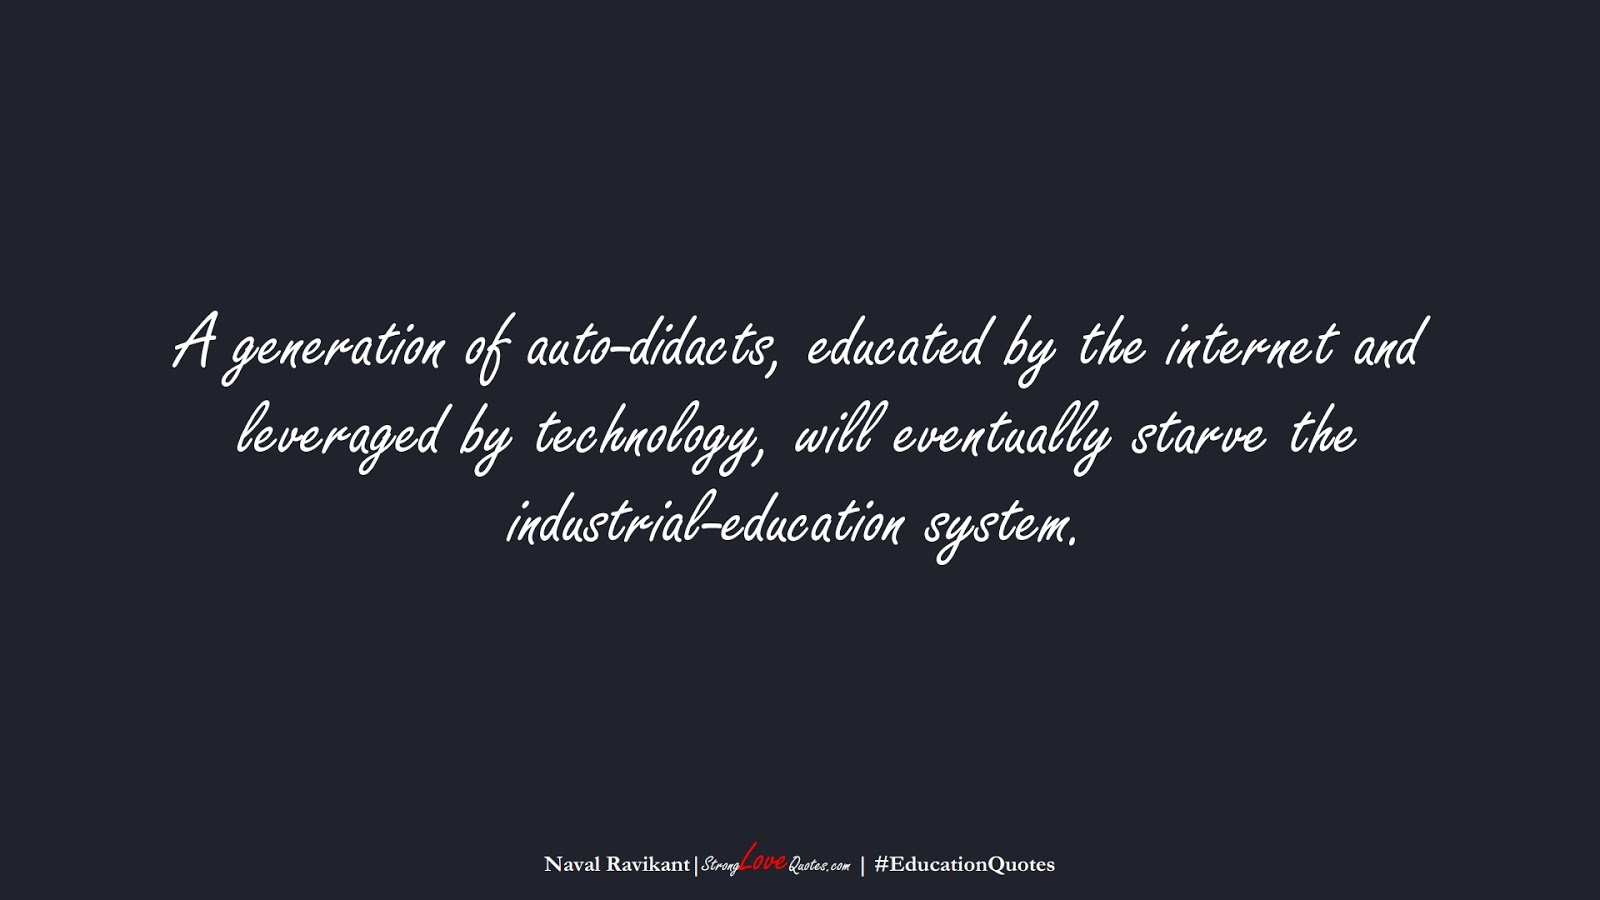 A generation of auto-didacts, educated by the internet and leveraged by technology, will eventually starve the industrial-education system. (Naval Ravikant);  #EducationQuotes